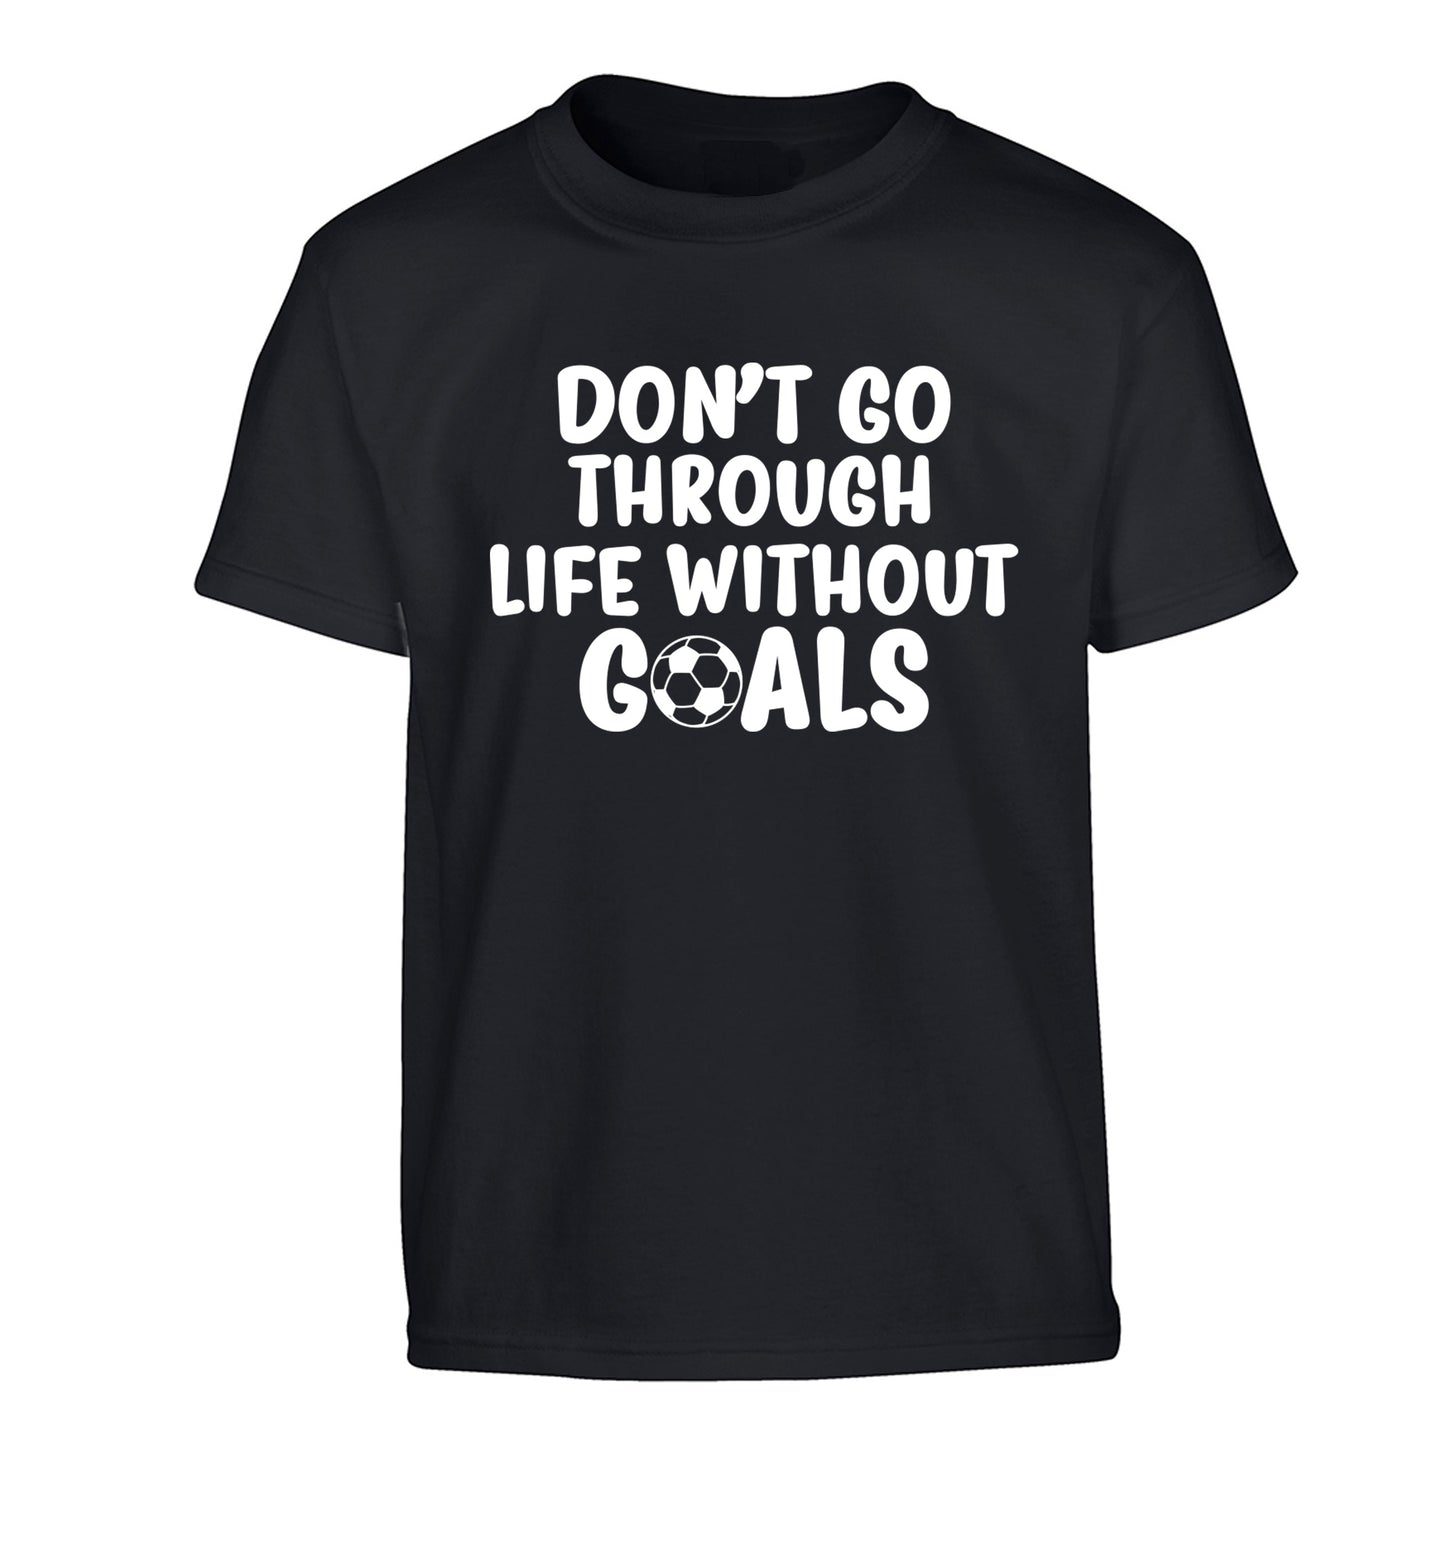 Don't go through life without goals Children's black Tshirt 12-14 Years